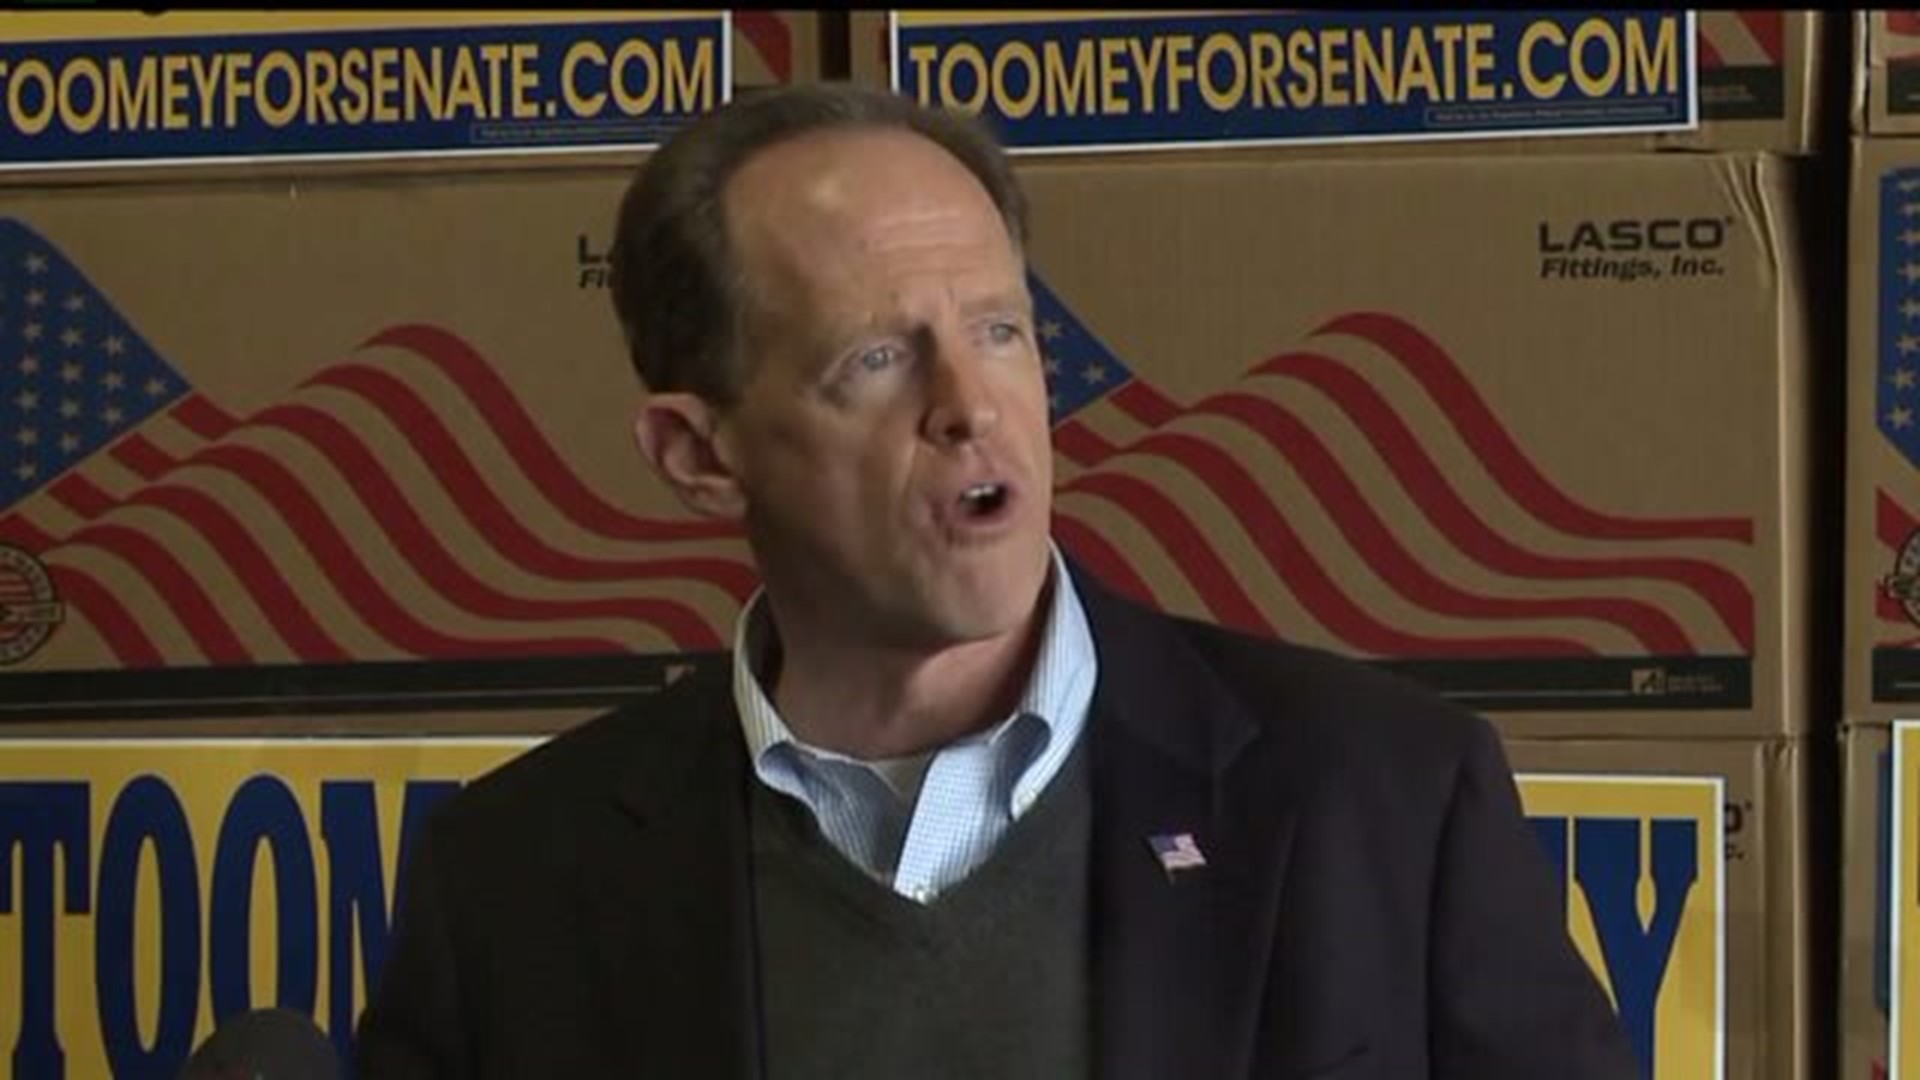 Pat Toomey makes campaign stop in Cumberland County